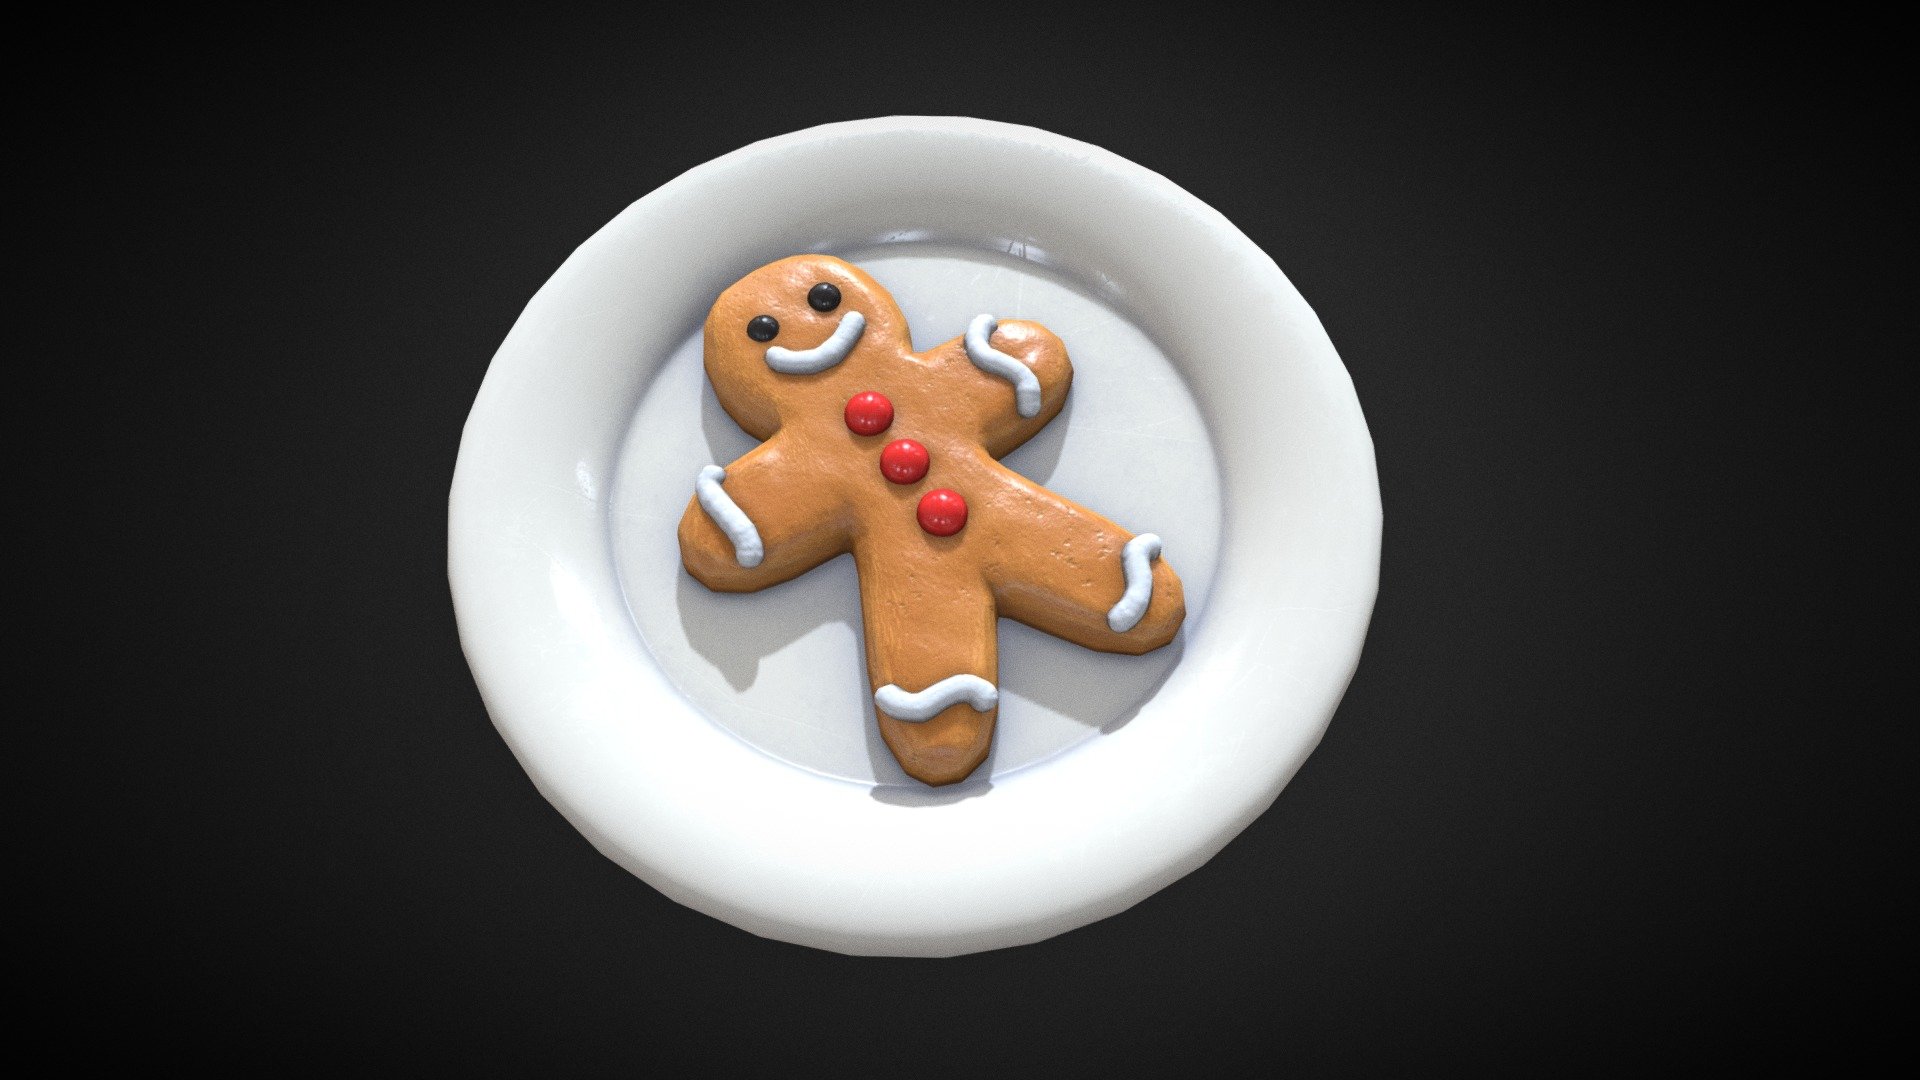 Stylized Gingerbread Man
Modeled with Sculped with Blender.
Textured with Substance Painter.
Manually with UV Wrapped.
Low Poly 3d model